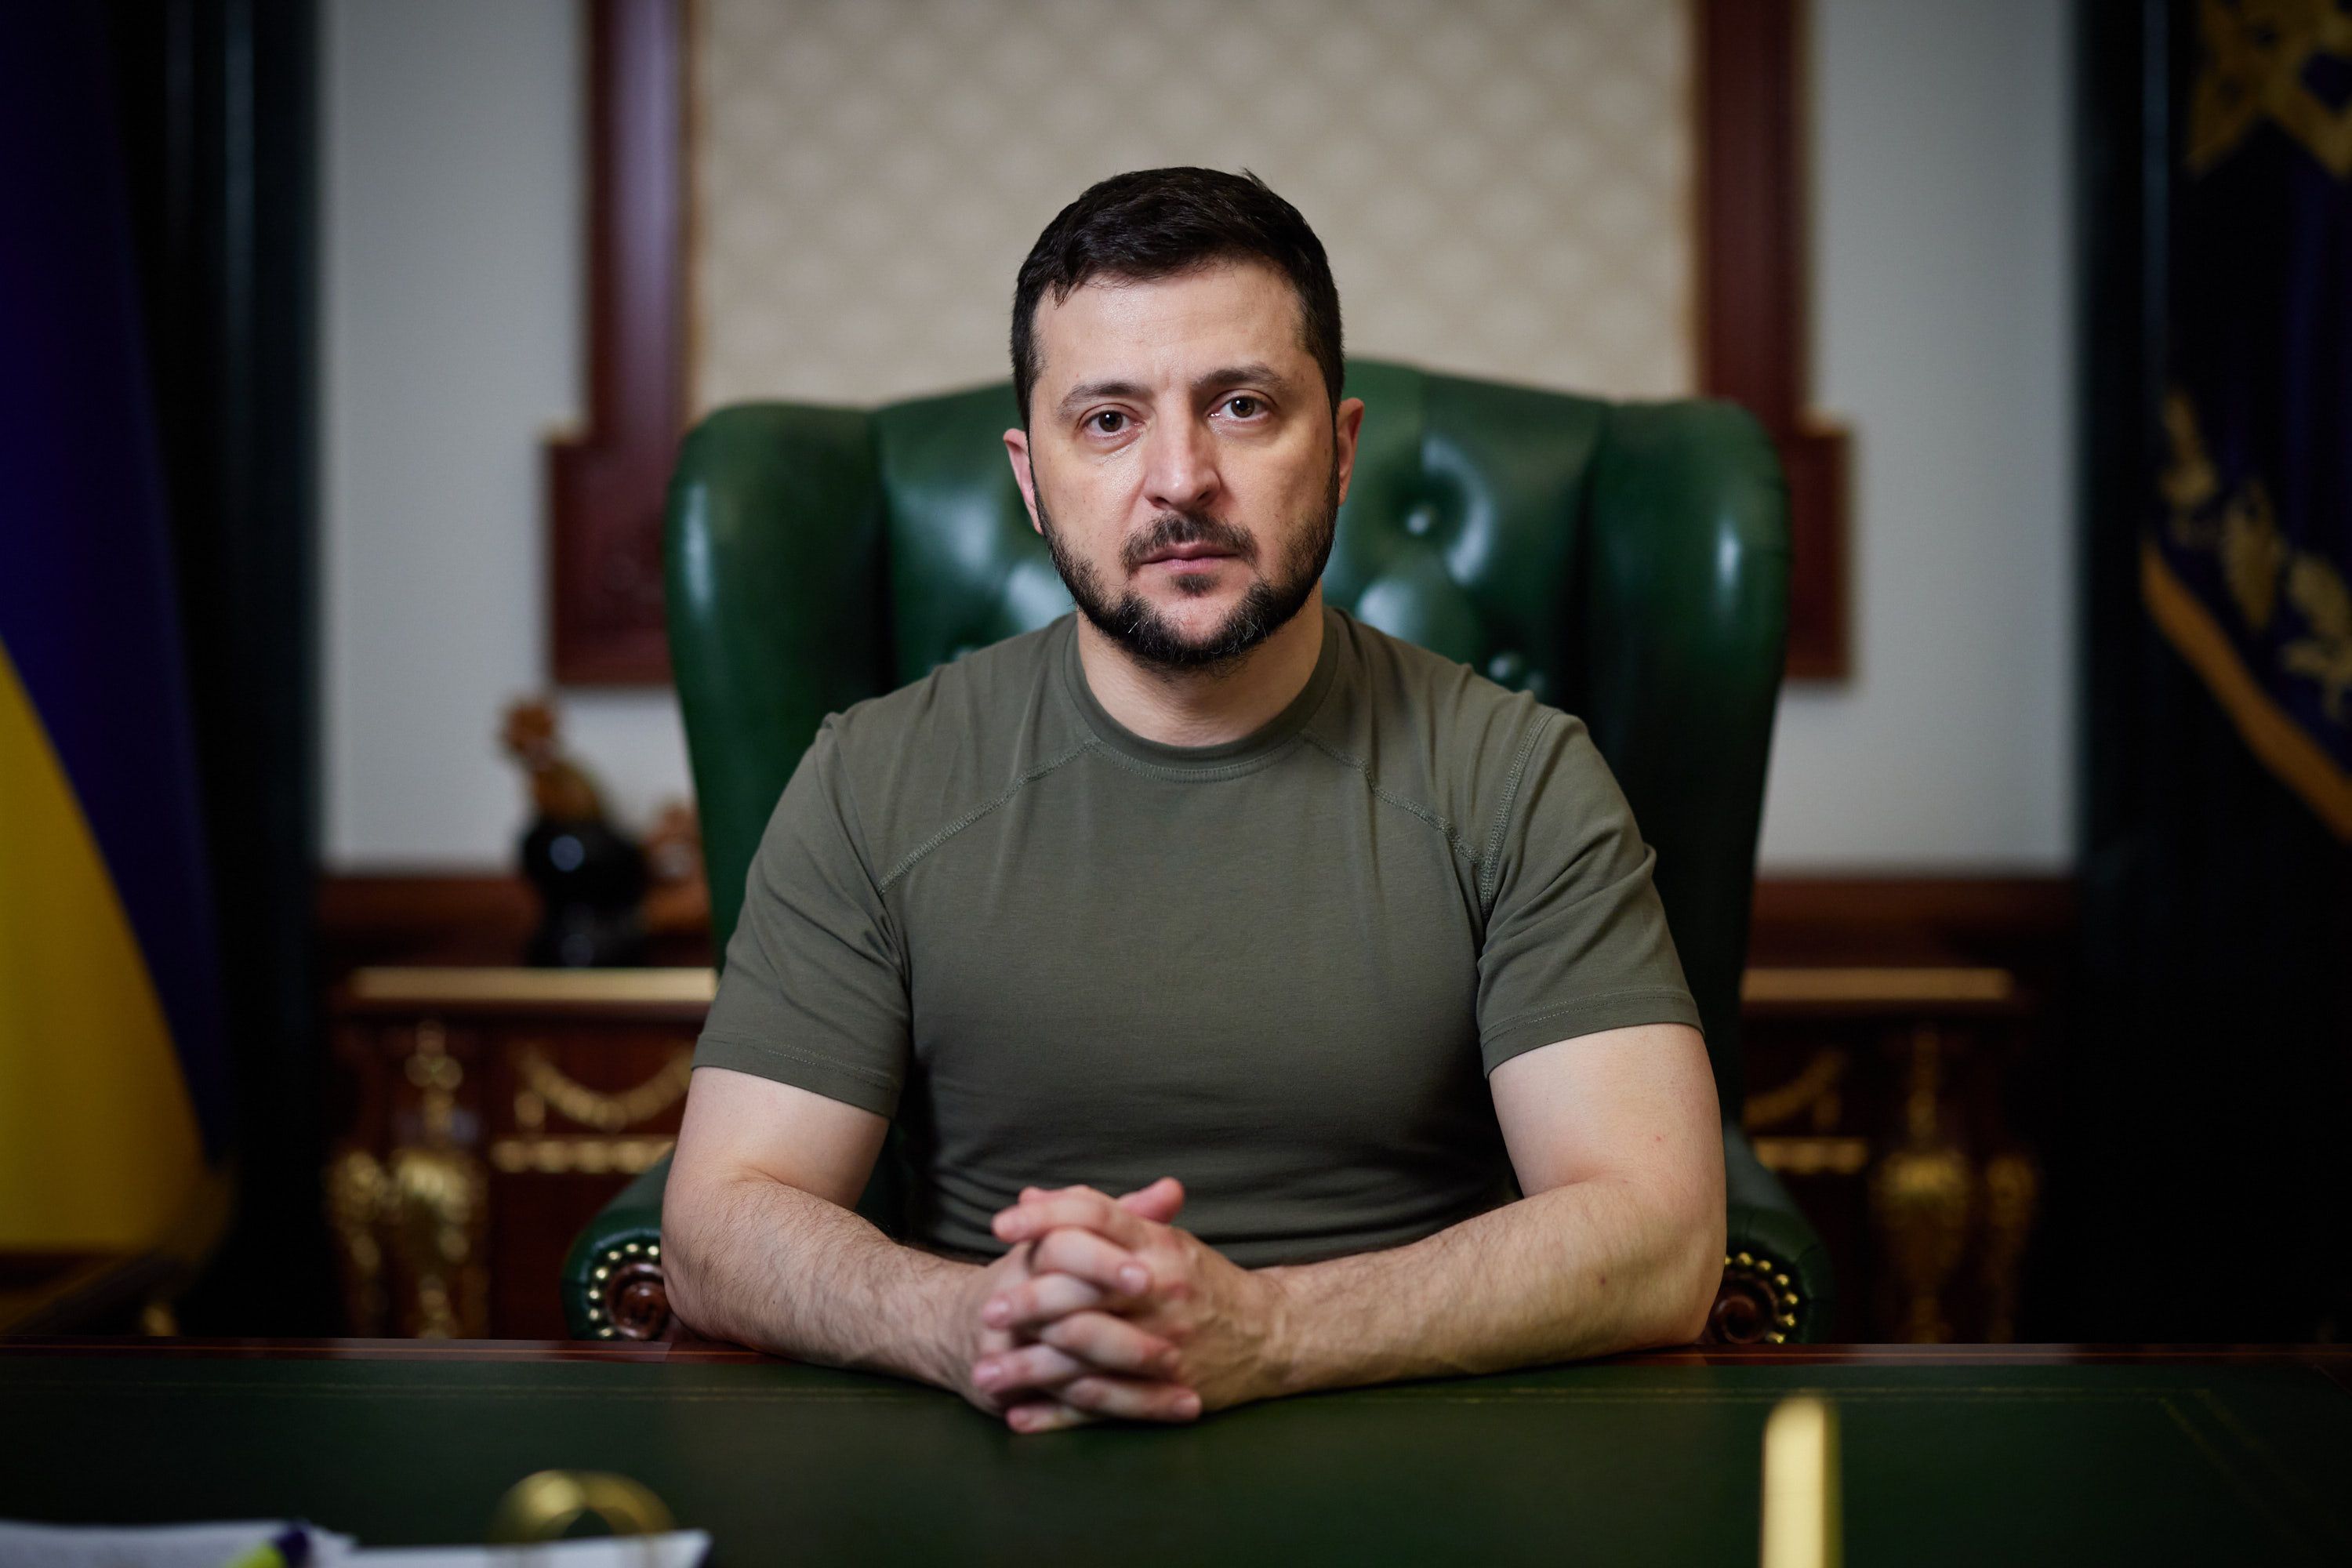 The future of Ukraine directly depends on the strength of our resistance in all its forms - address by President Volodymyr Zelenskyy